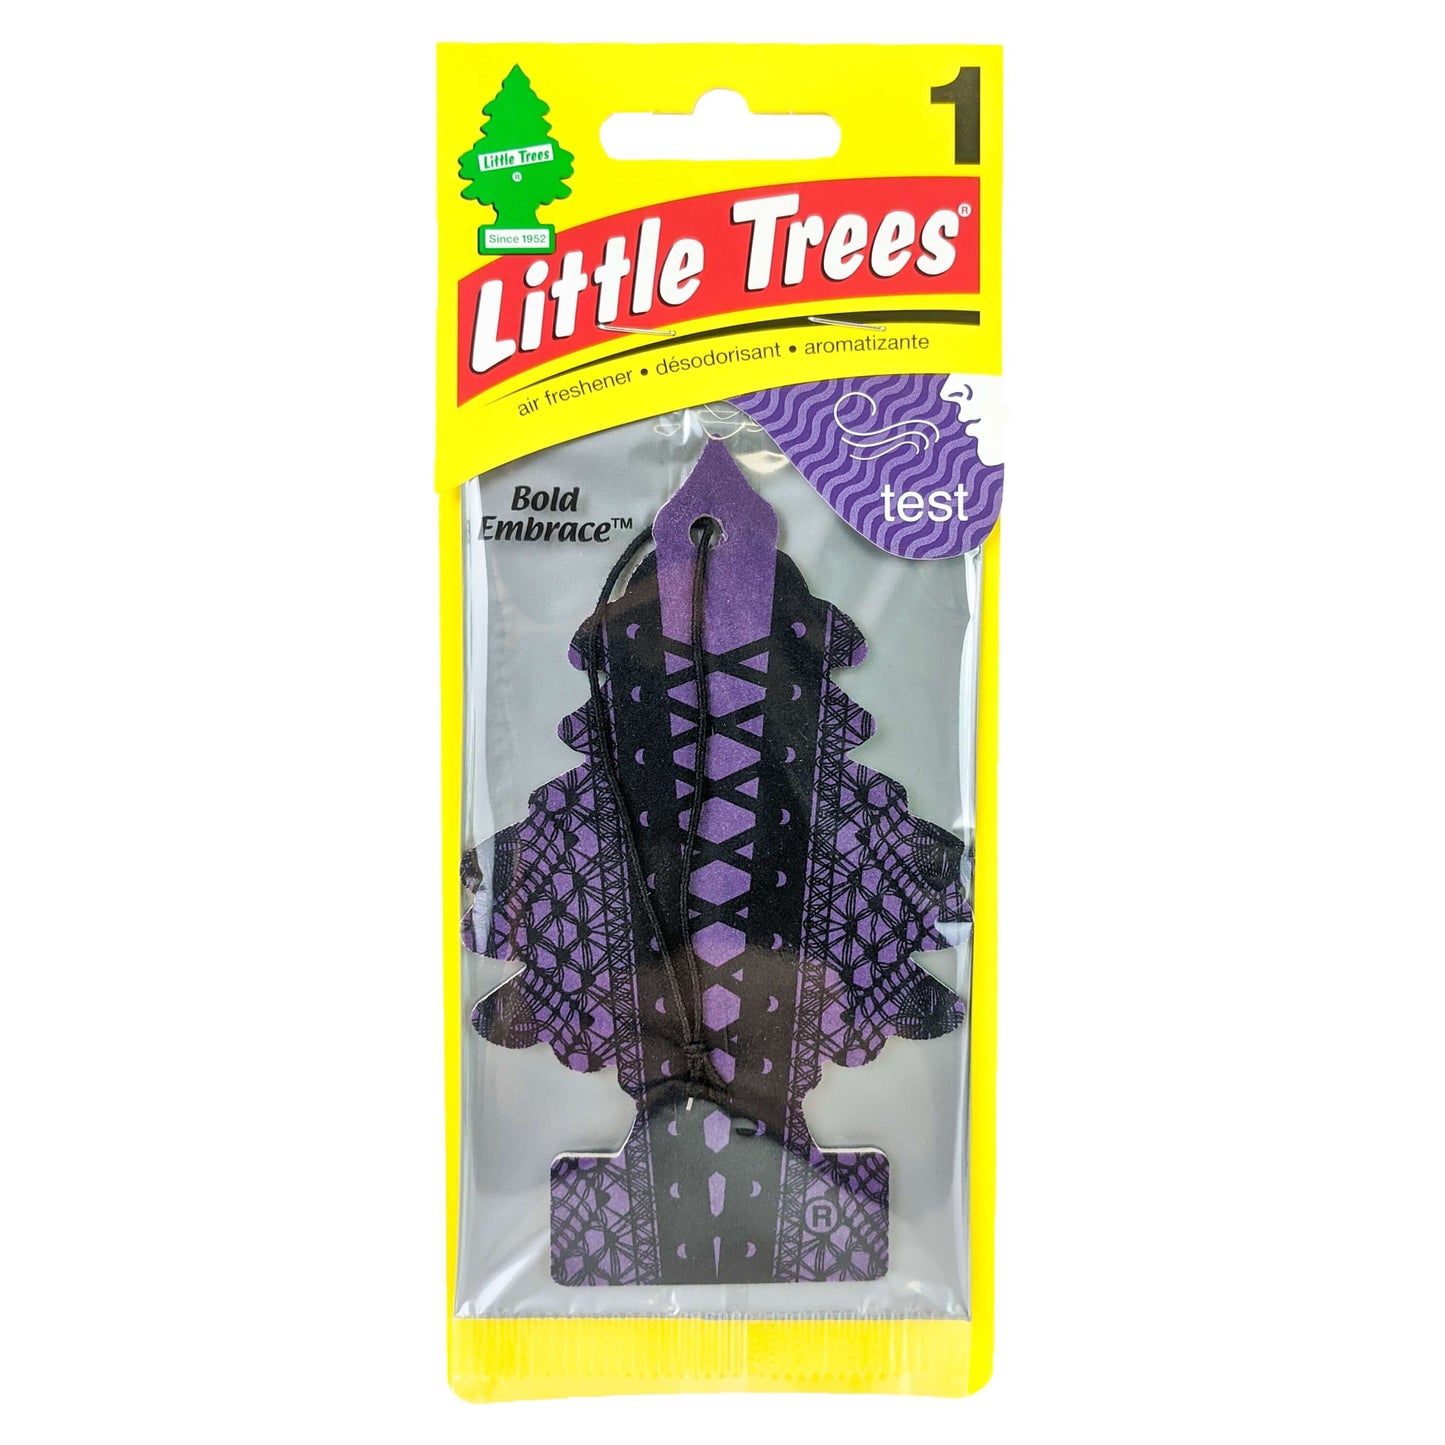 Little Trees Bold Embrace Scent Hanging Air Freshener